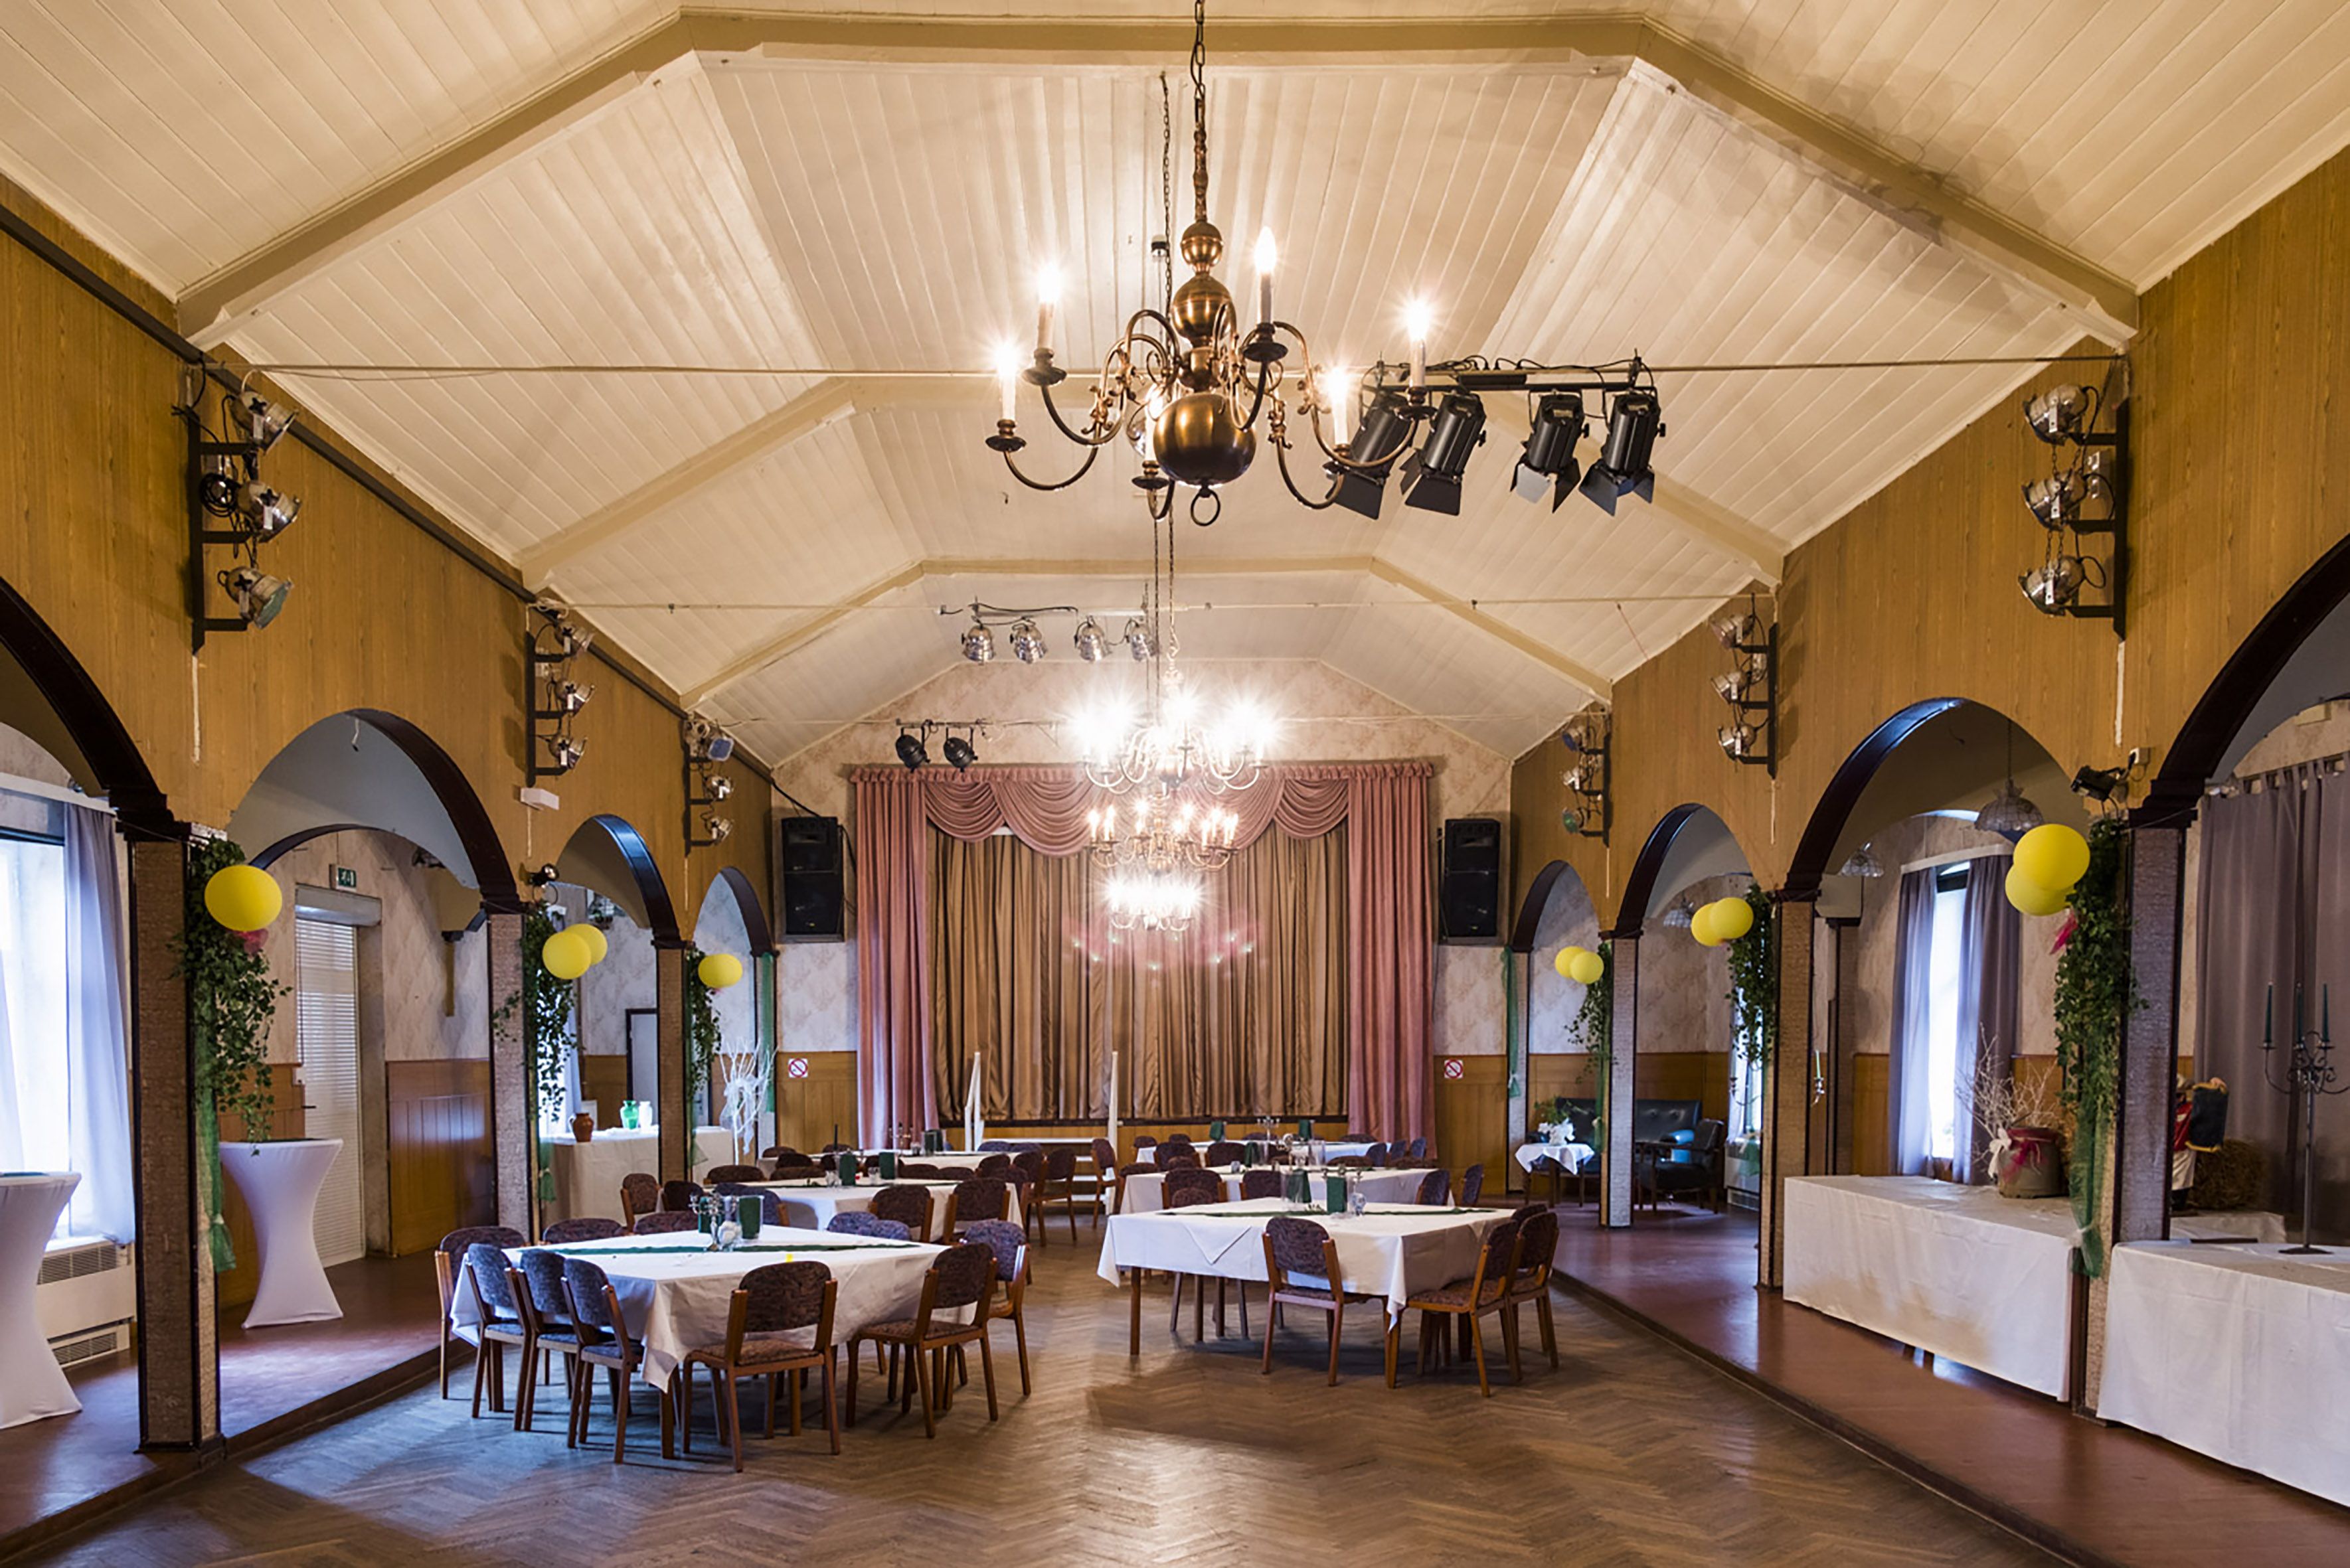 The East German-era banquet hall in Amt Neuhaus where more than 400 locals gathered in October 2015 to debate the arrival of refugees in Sumte. The hall was a chaotic scene, with journalists, far-right agitators, and many worried villagers who wanted to know what the arrivals would mean. Image by Valerie Schmidt. Germany, 2017.